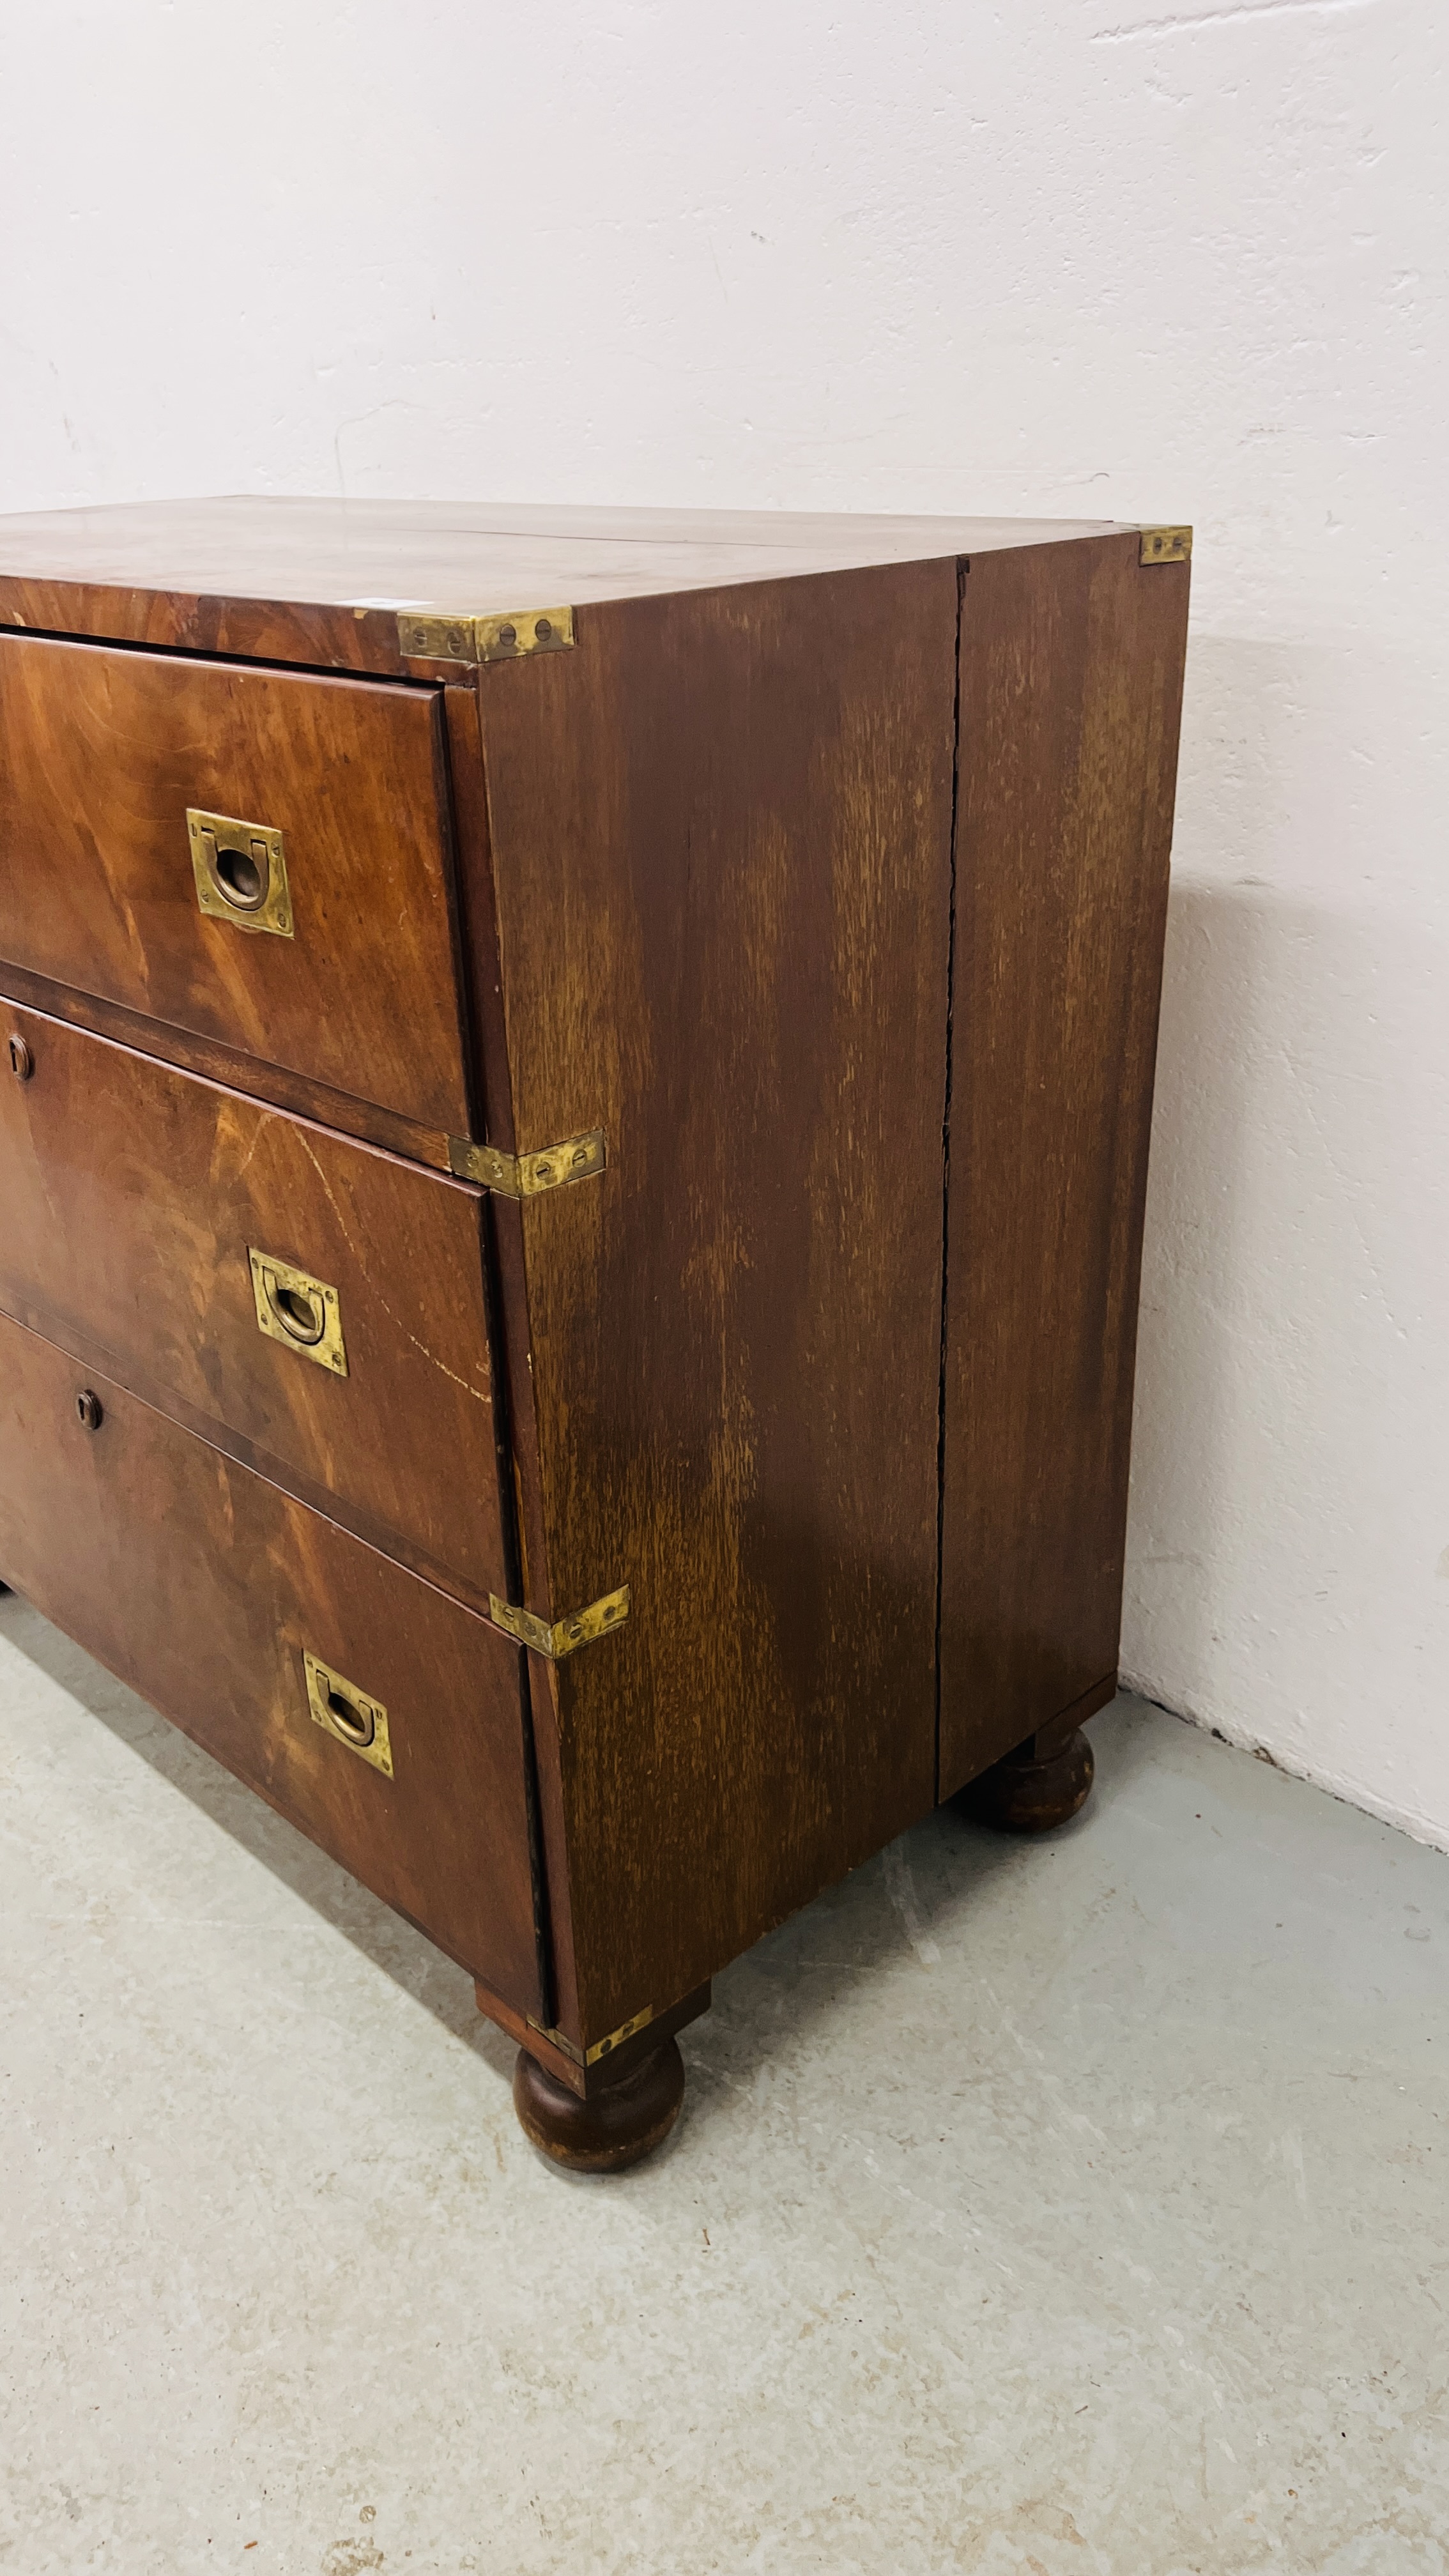 AN ANTIQUE MAHOGANY THREE DRAWER CAMPAIGN CHEST WITH BRASS HANDLES AN BANDING HEIGHT 80CM. - Image 2 of 7